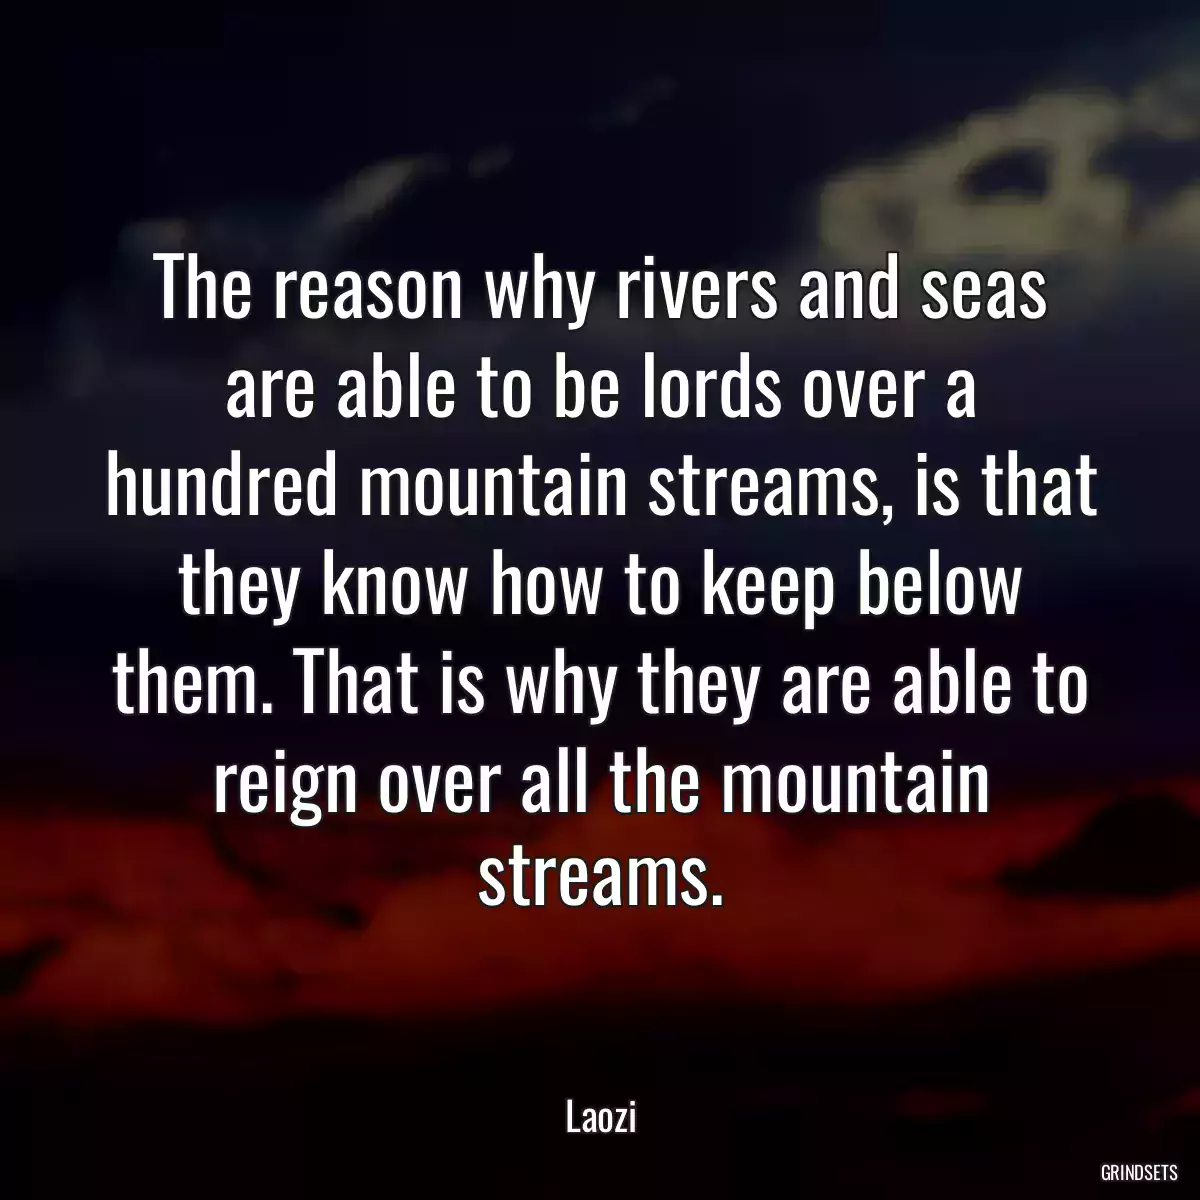 The reason why rivers and seas are able to be lords over a hundred mountain streams, is that they know how to keep below them. That is why they are able to reign over all the mountain streams.